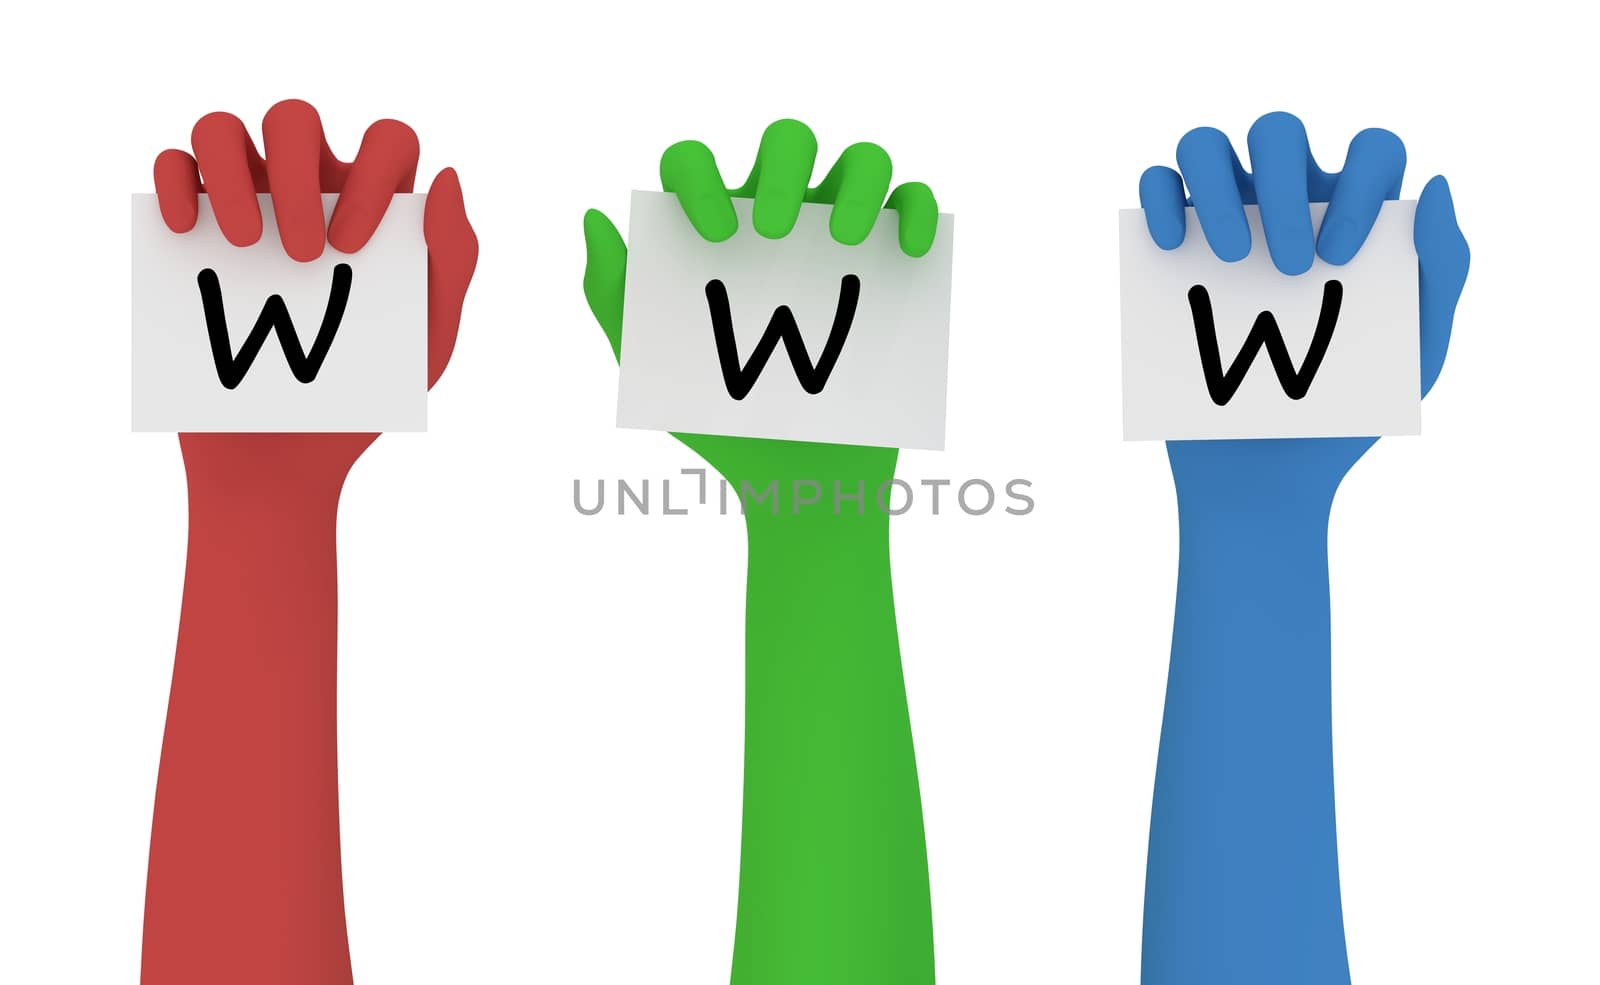 Illustration of red green and blue hands, each holding a note marked with a letter W